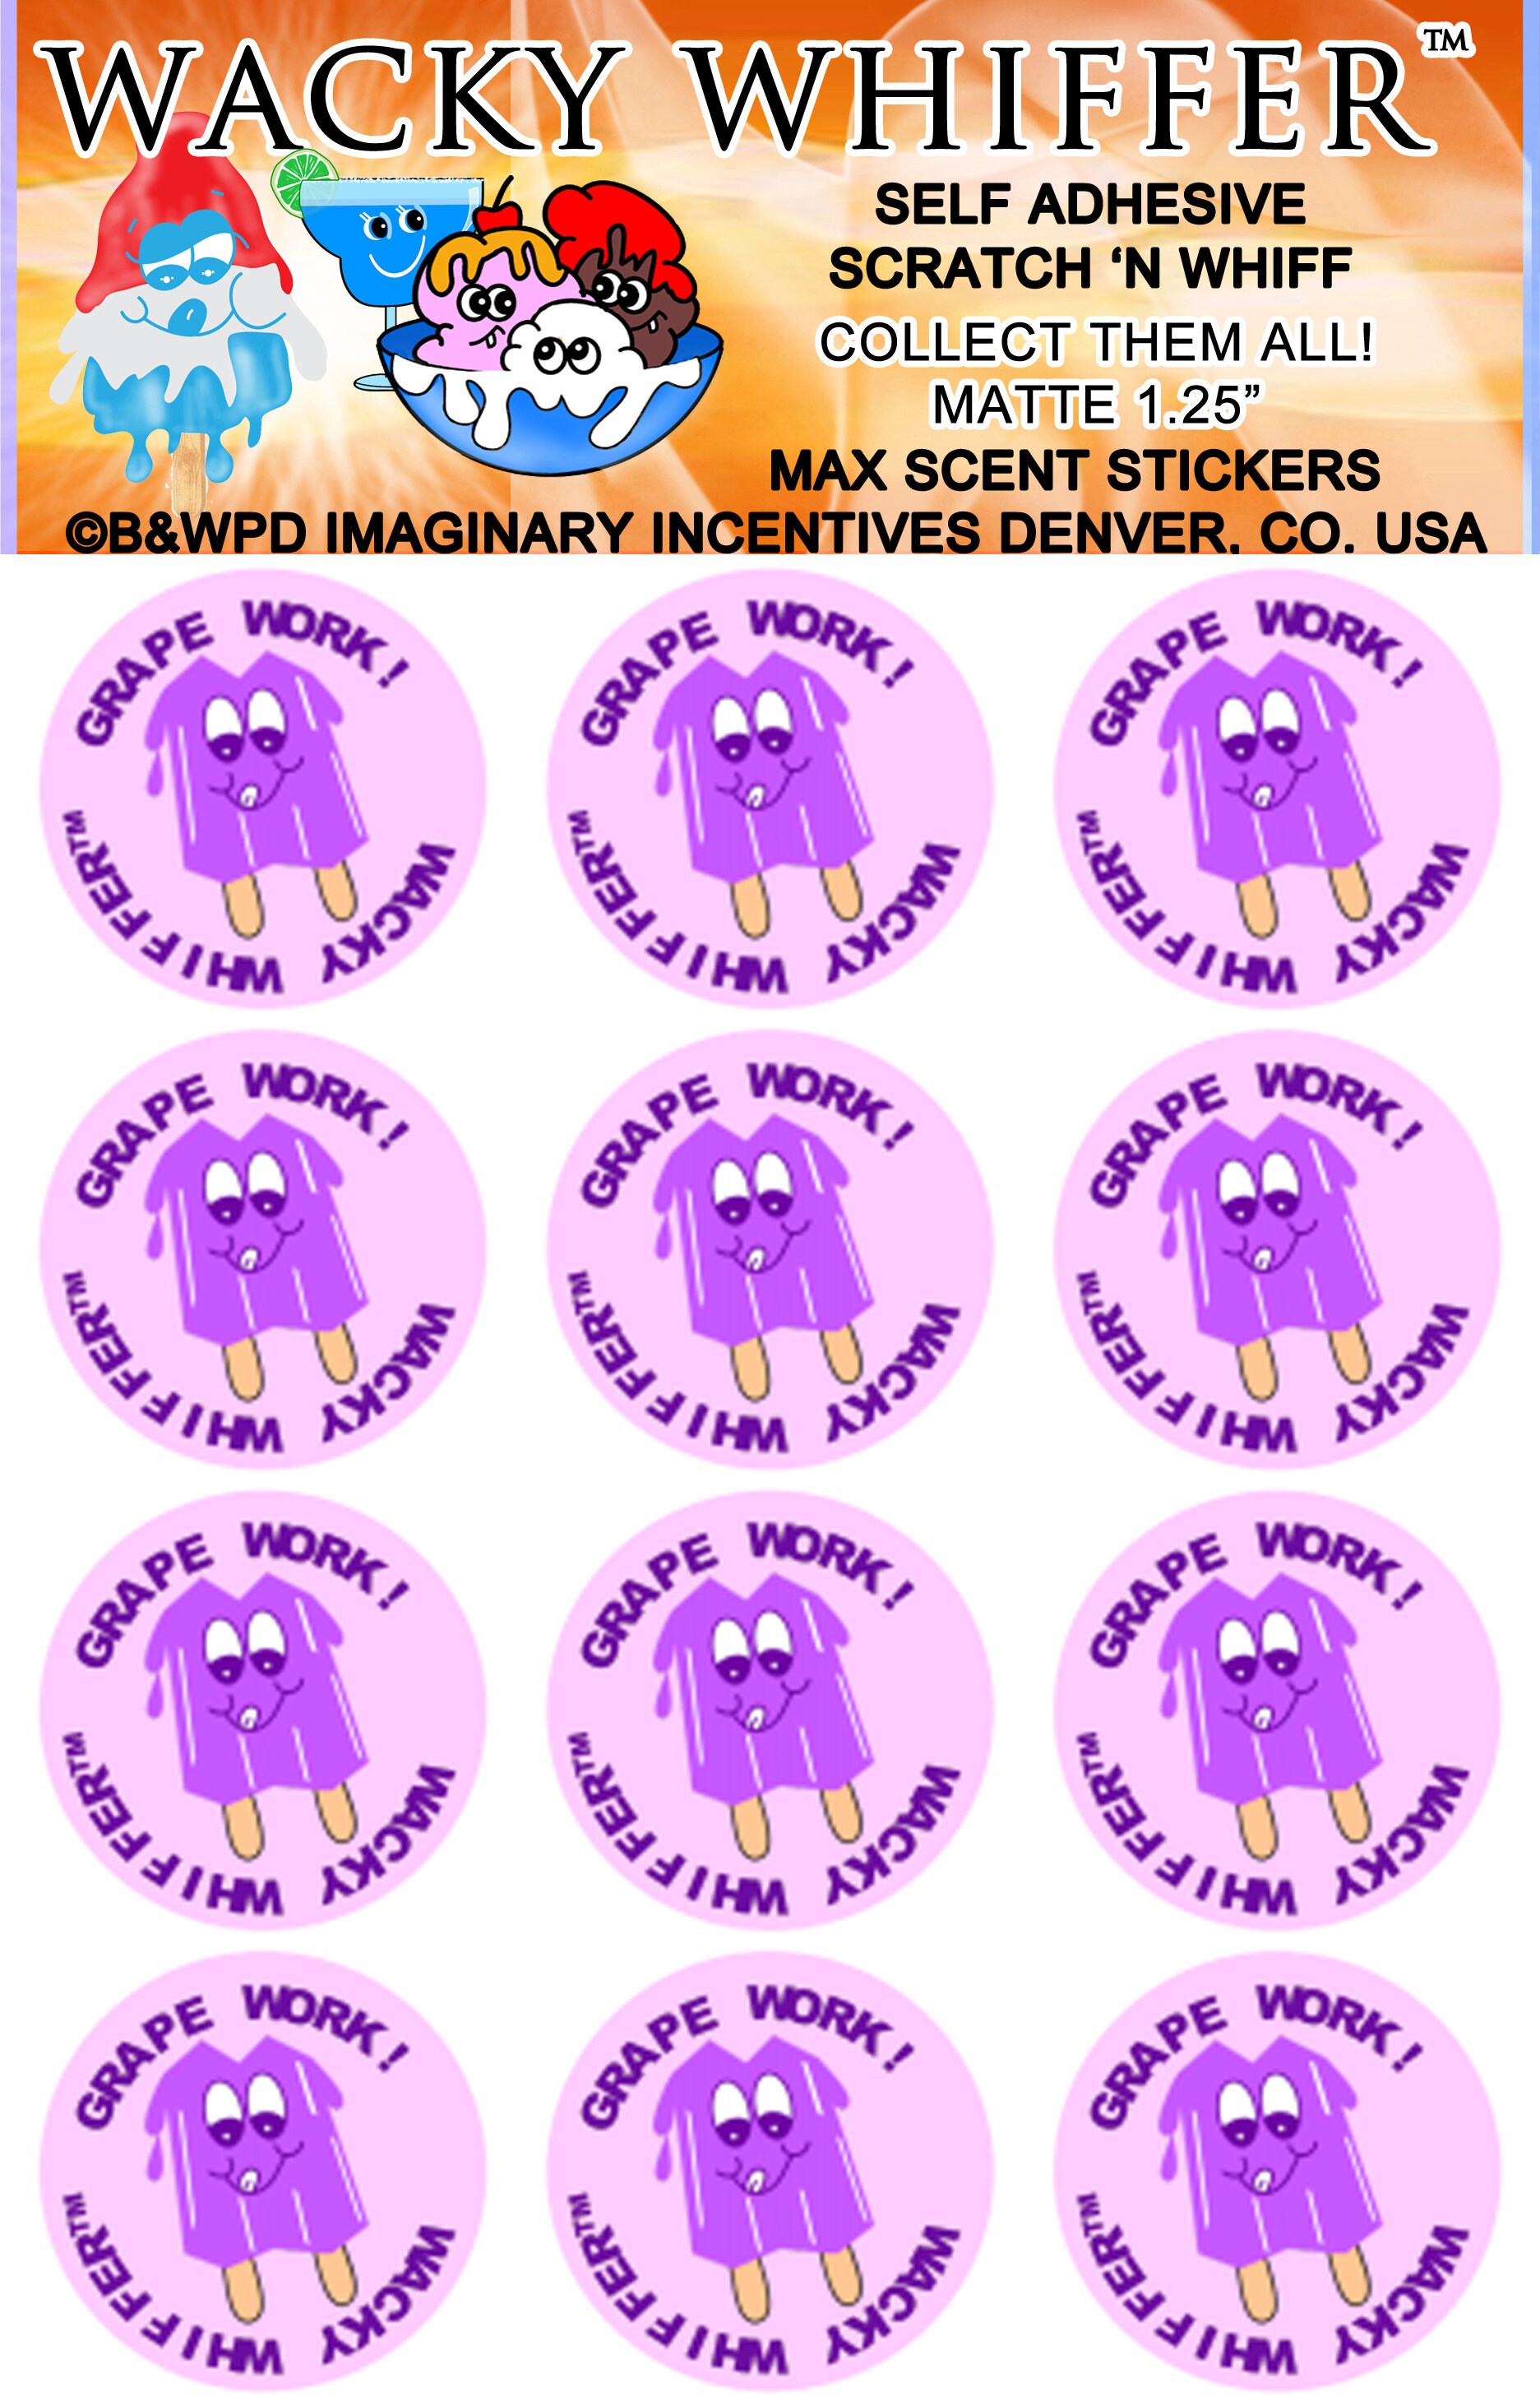 NEW Horror Series Grape Hard Candy Max Scent Scratch and Sniff Stickers Wacky Whiffer Whiffers Matte MAX SCENT Scratch and Sniff Stickers